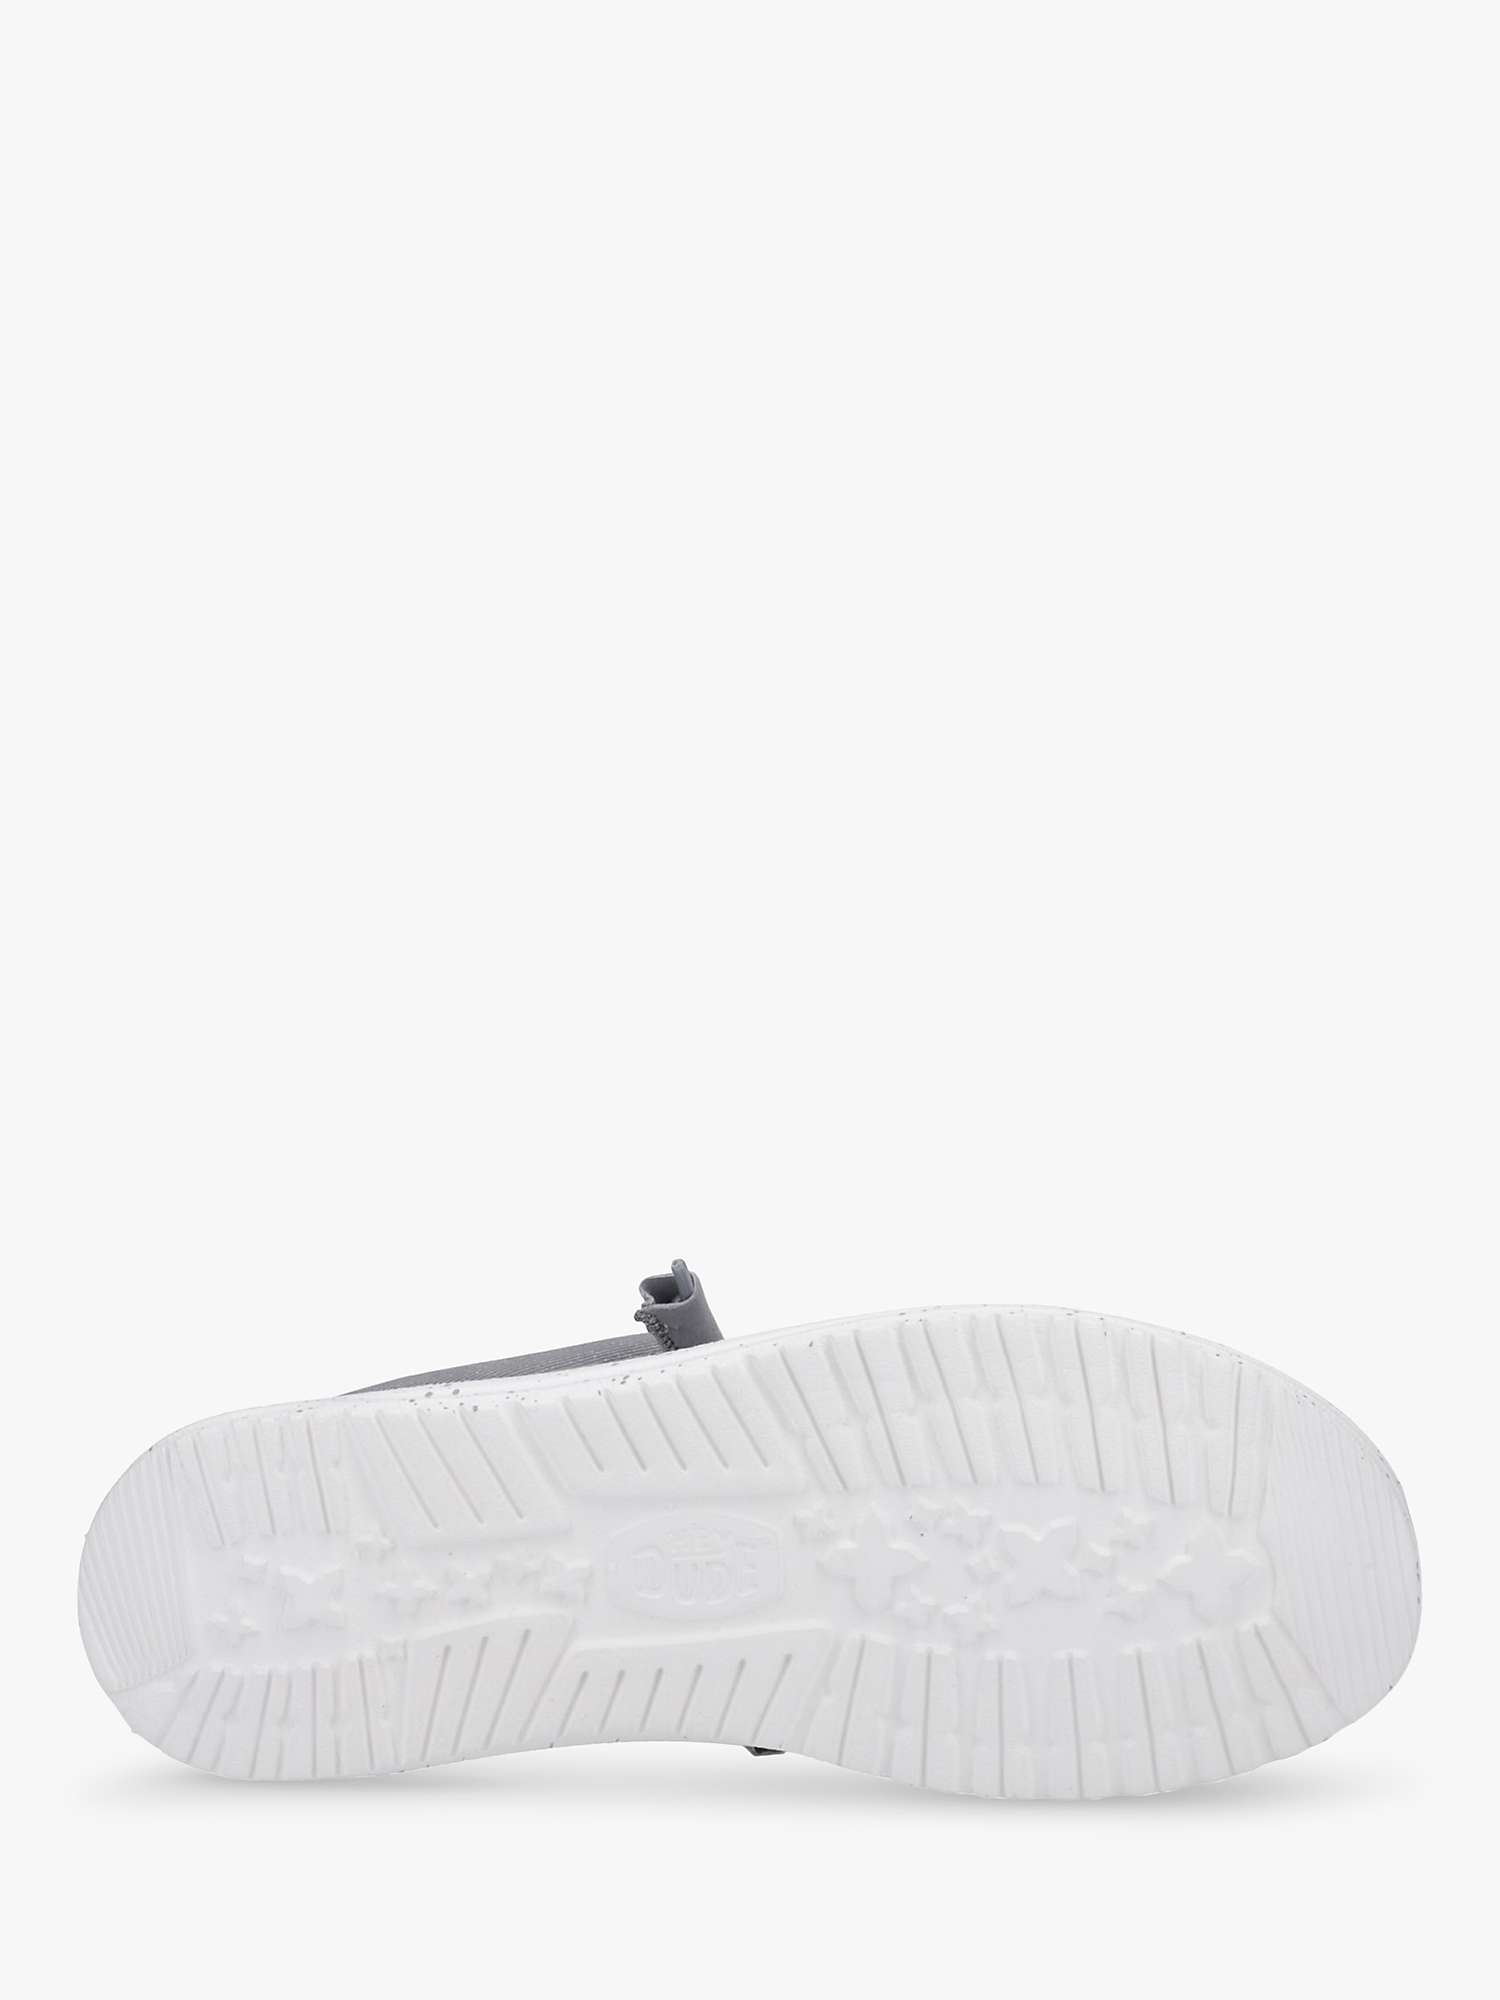 Buy Hey Dude Wally Canvas Shoes Online at johnlewis.com